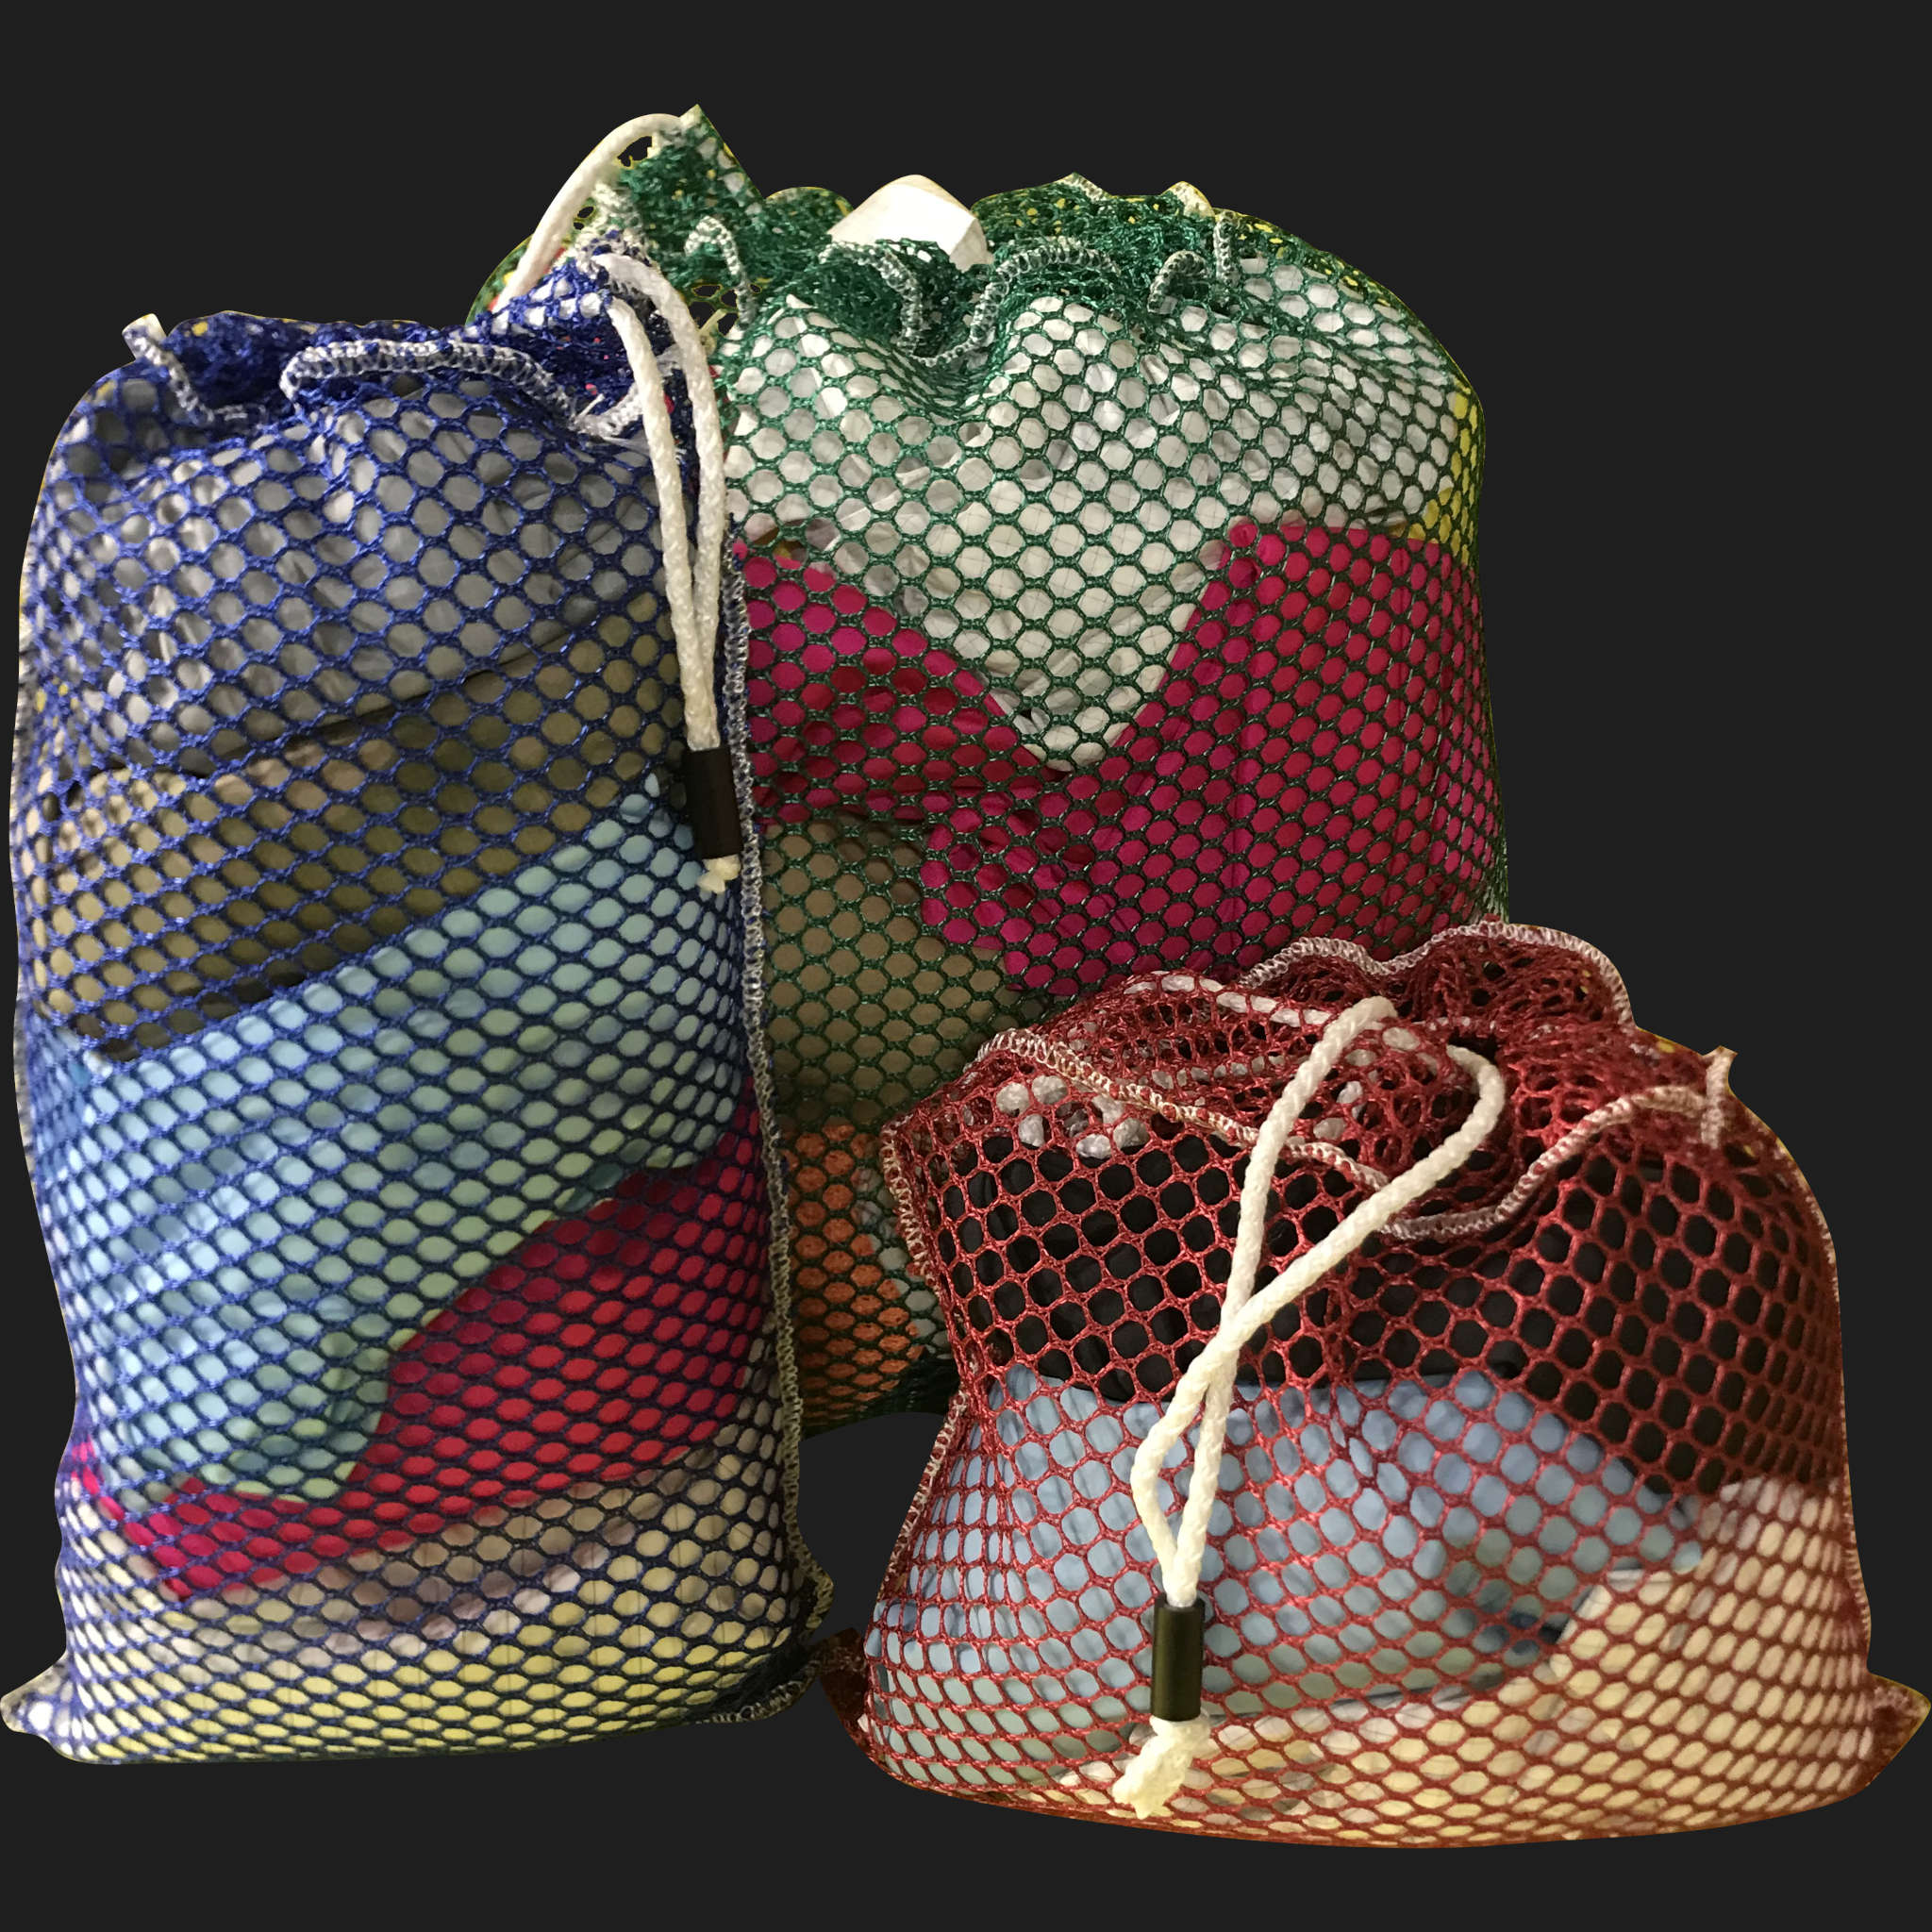 26" x 38" Customized Mesh-Net-Laundry Bags Heavy Duty with Cord and barrellock closure